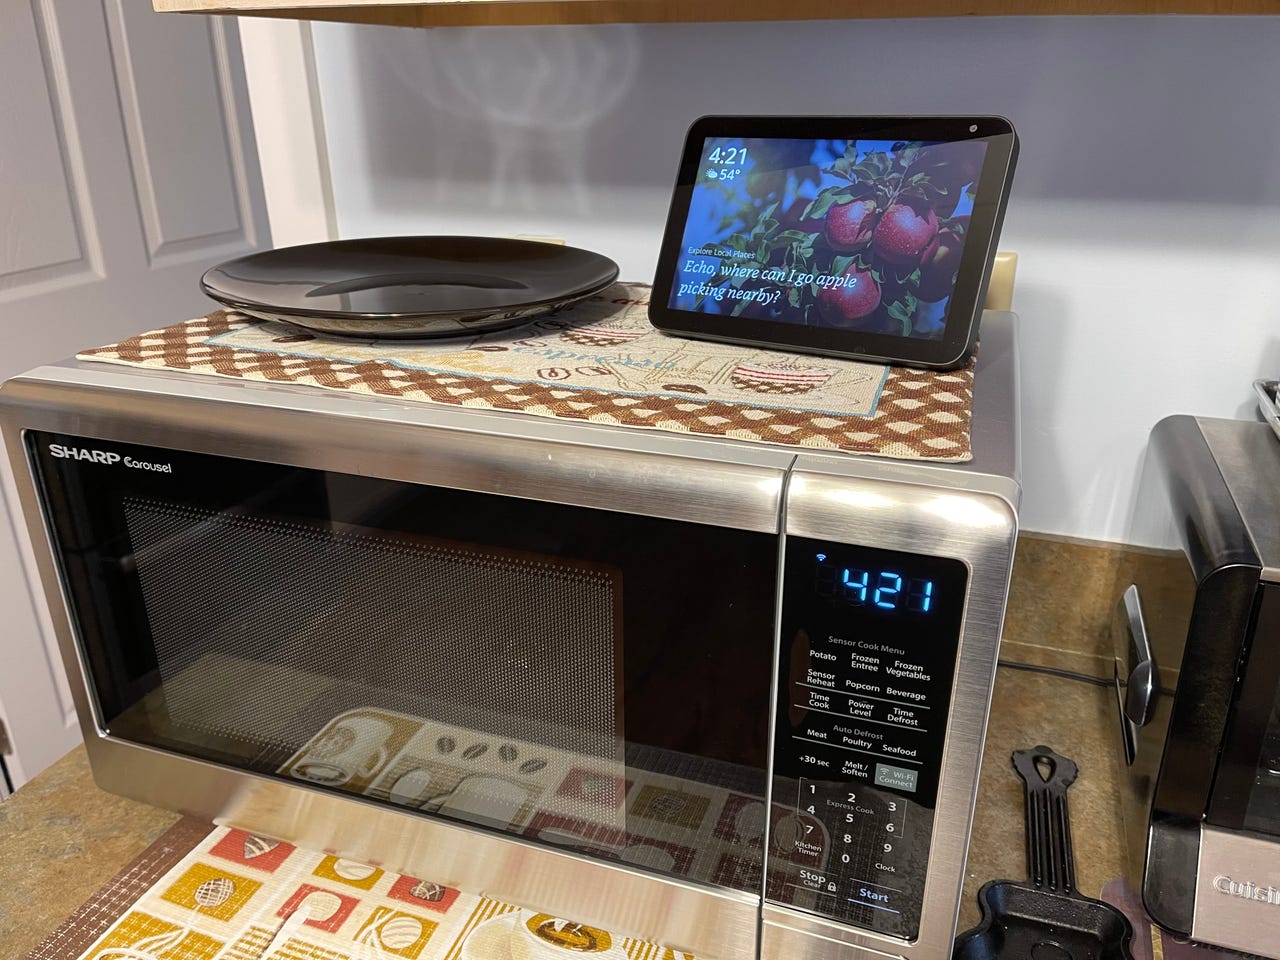 Panasonic Announces a Smart Microwave that Works with Alexa